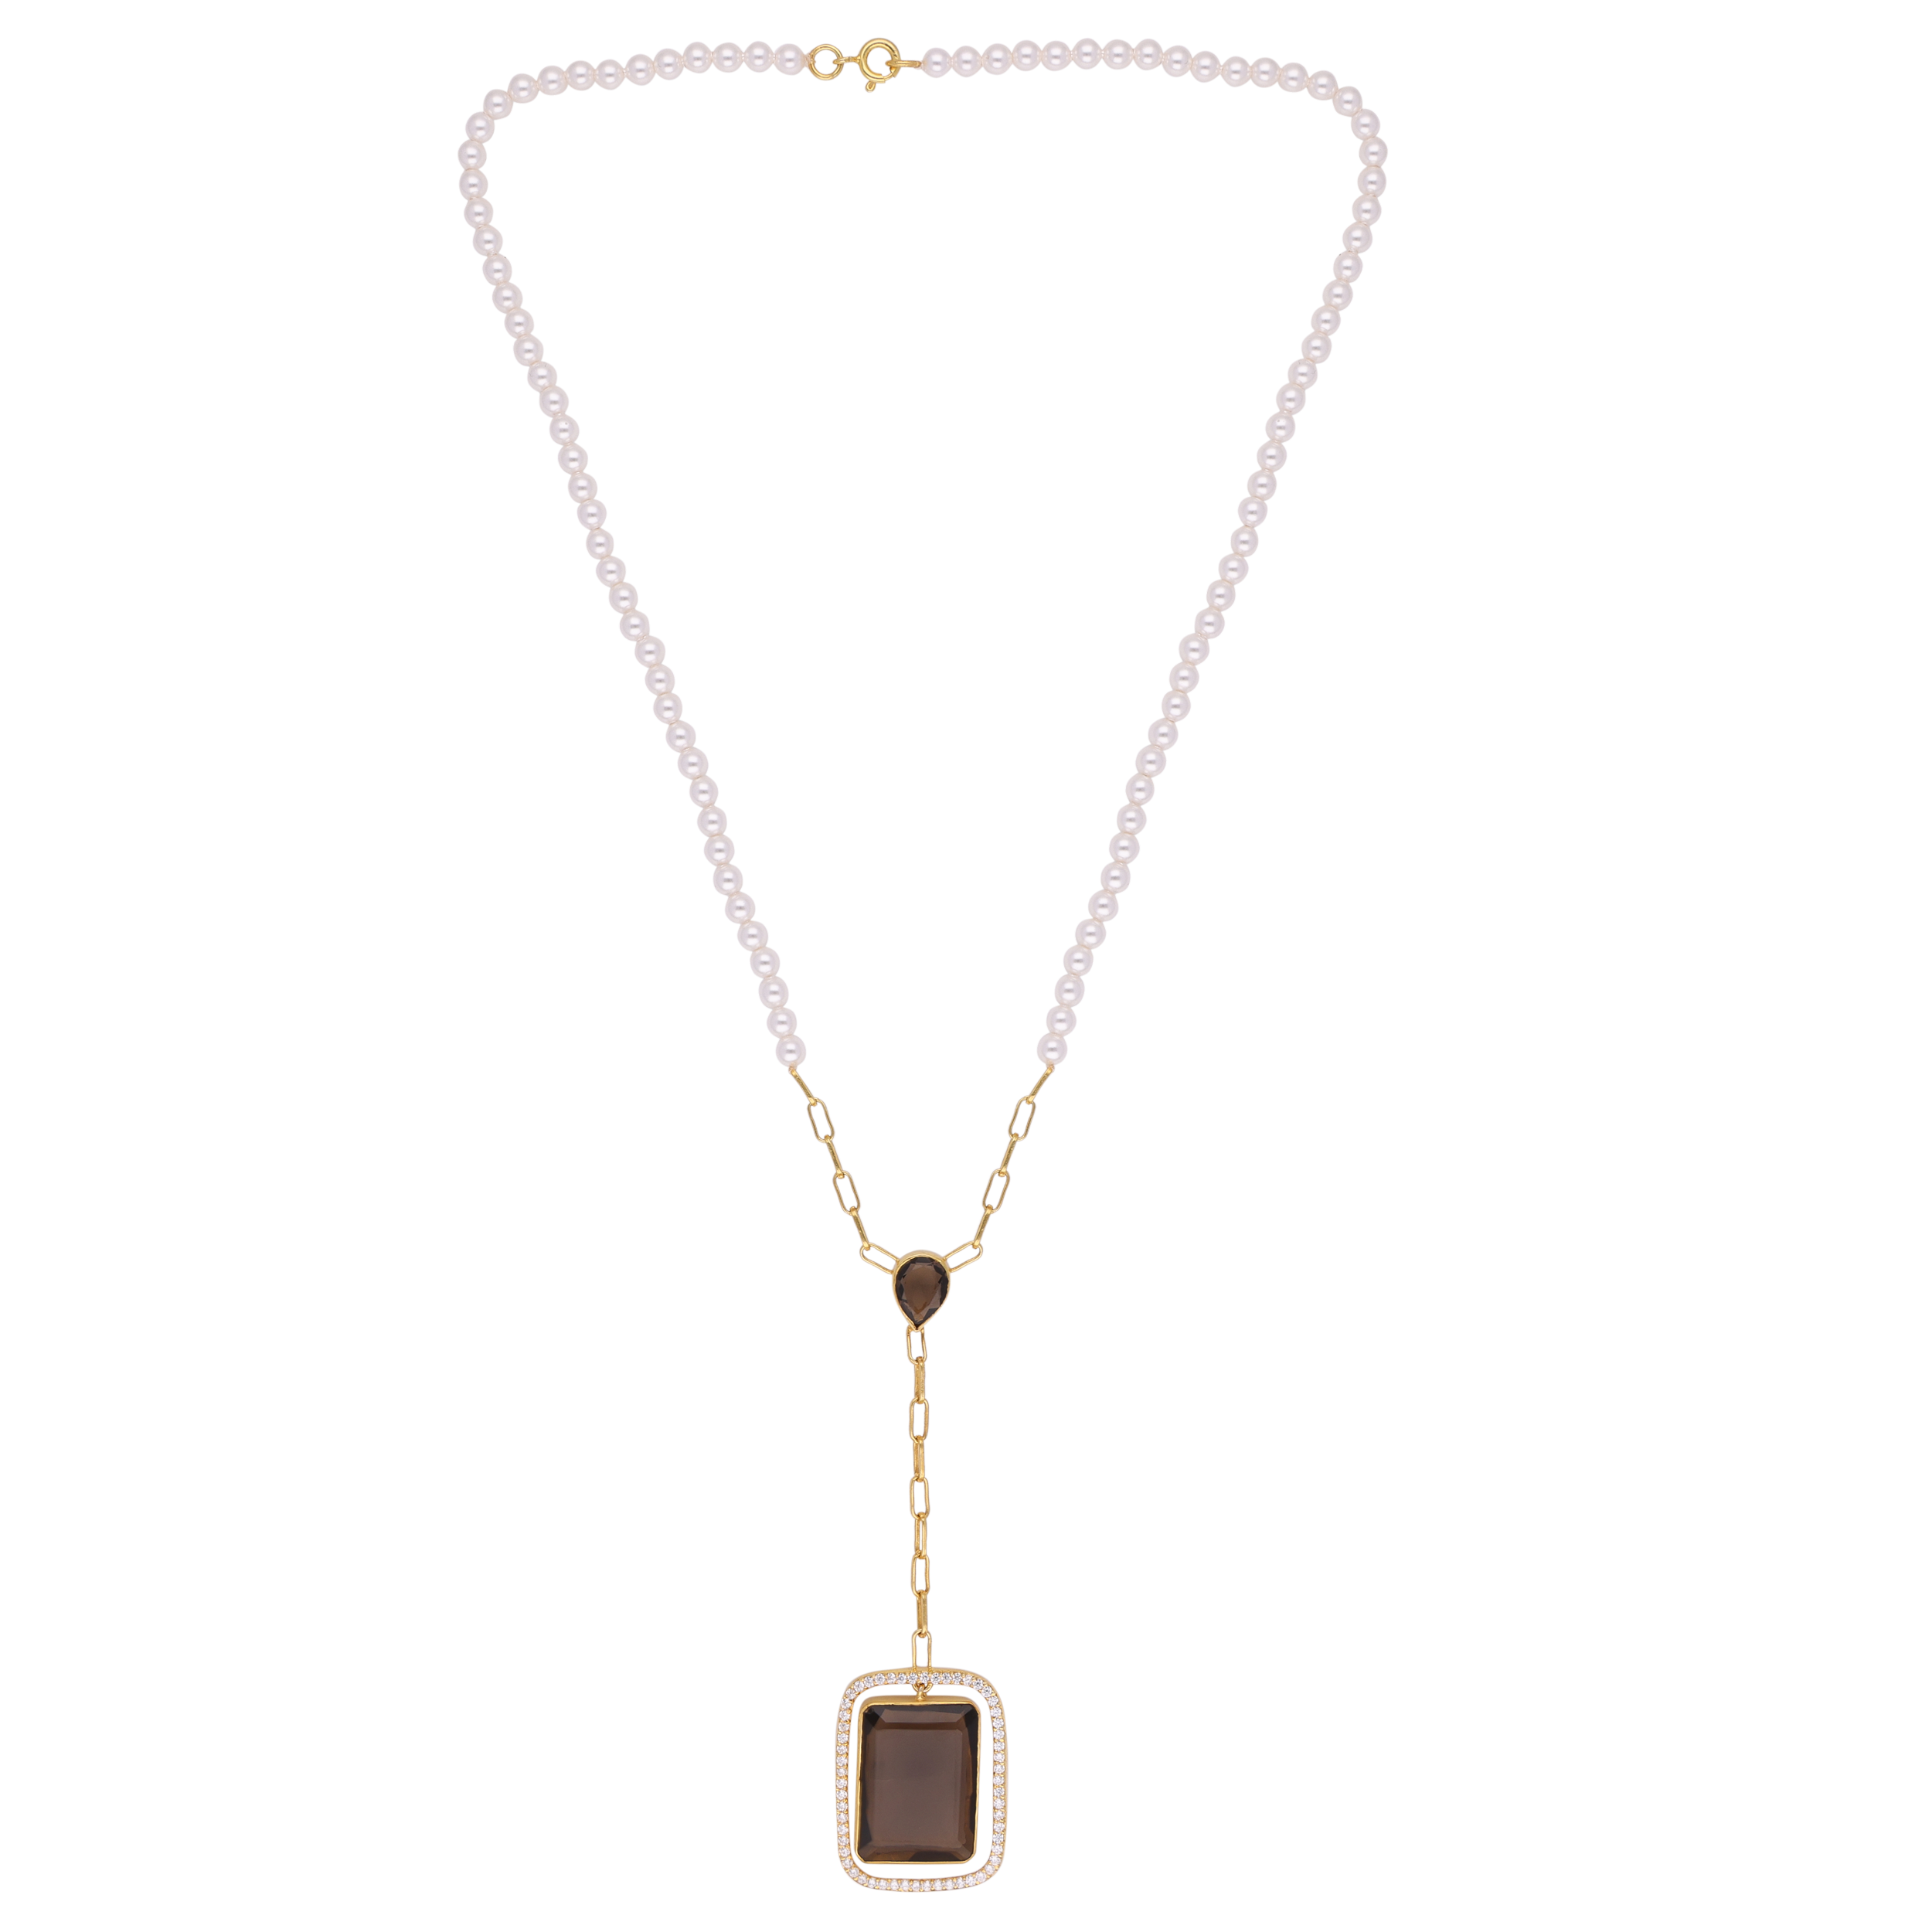 Geometric Glamour Gold-Plated Necklace | SKU: 0019586397, 0019586434, 0019586410, 0019586403, 0019586427